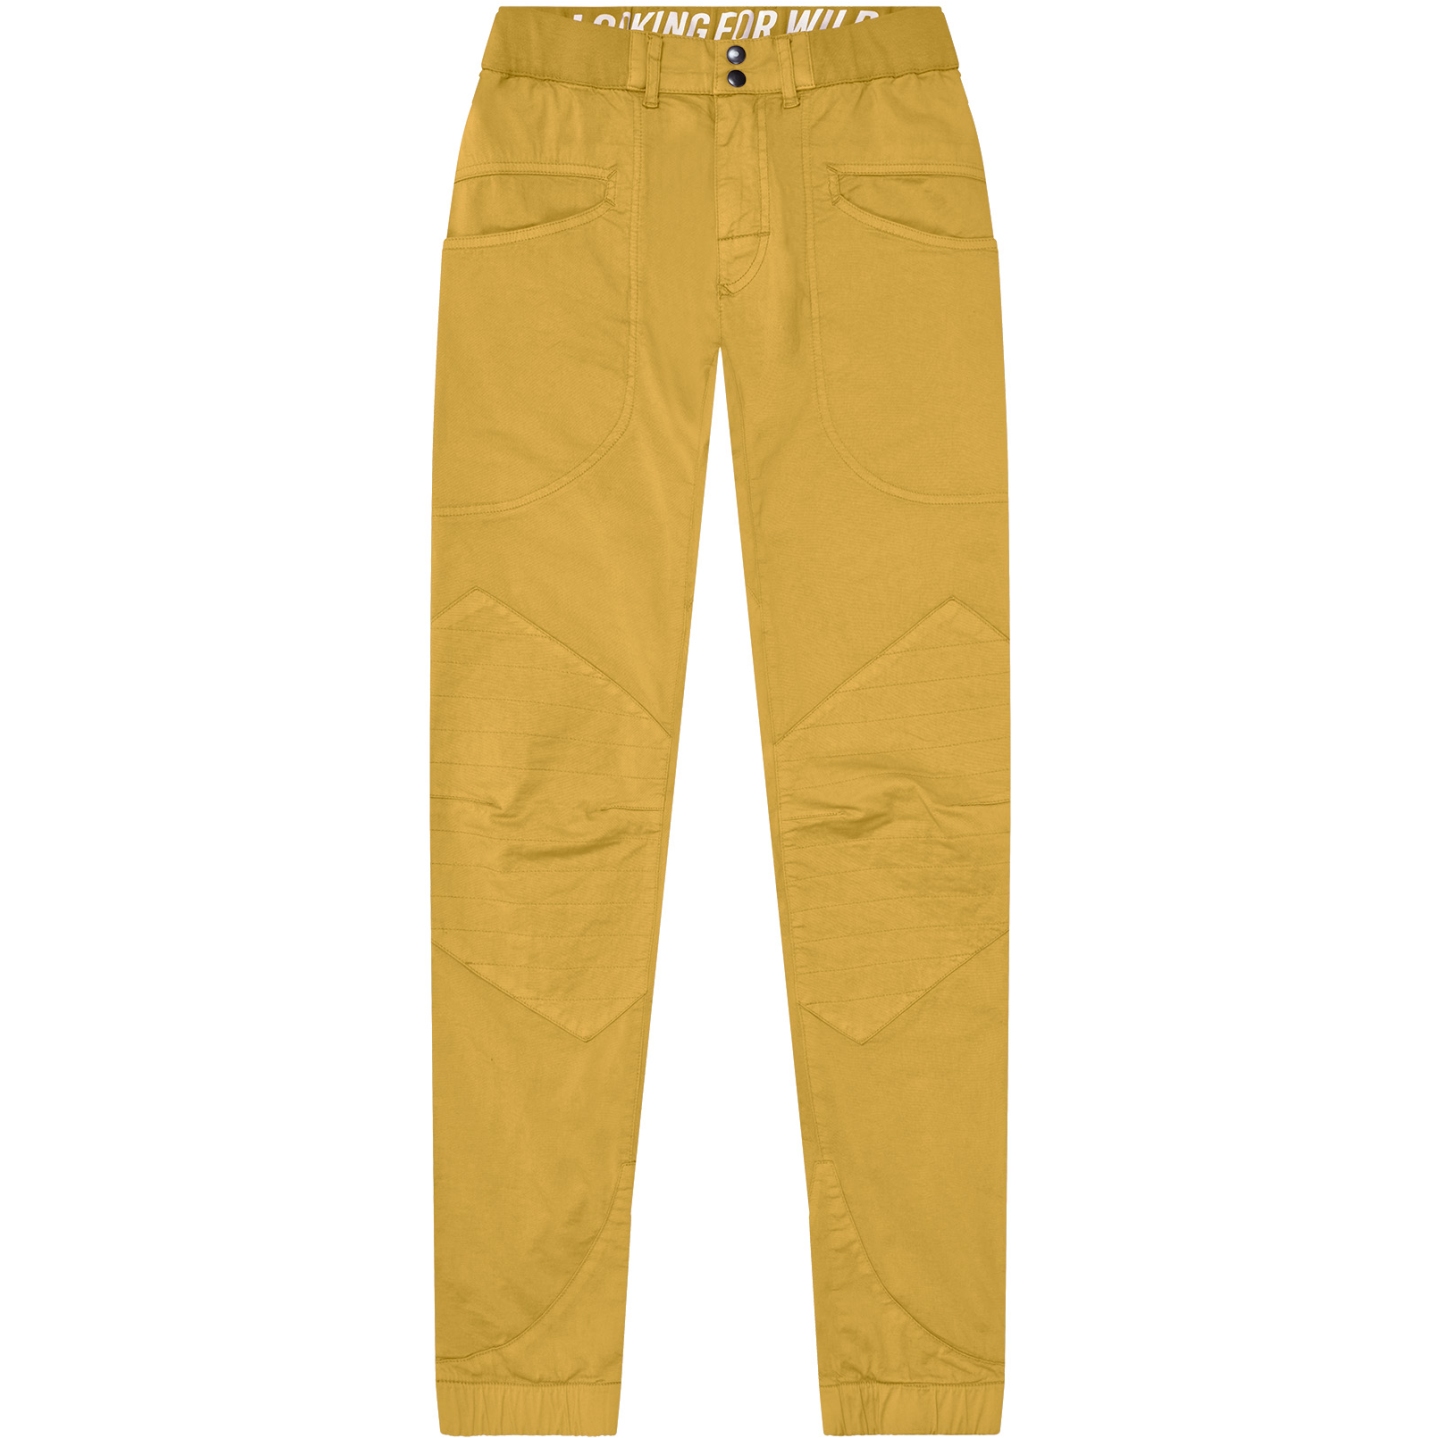 Picture of LOOKING FOR WILD Fitz Roy Men&#039;s Pants - Spicy Mustard